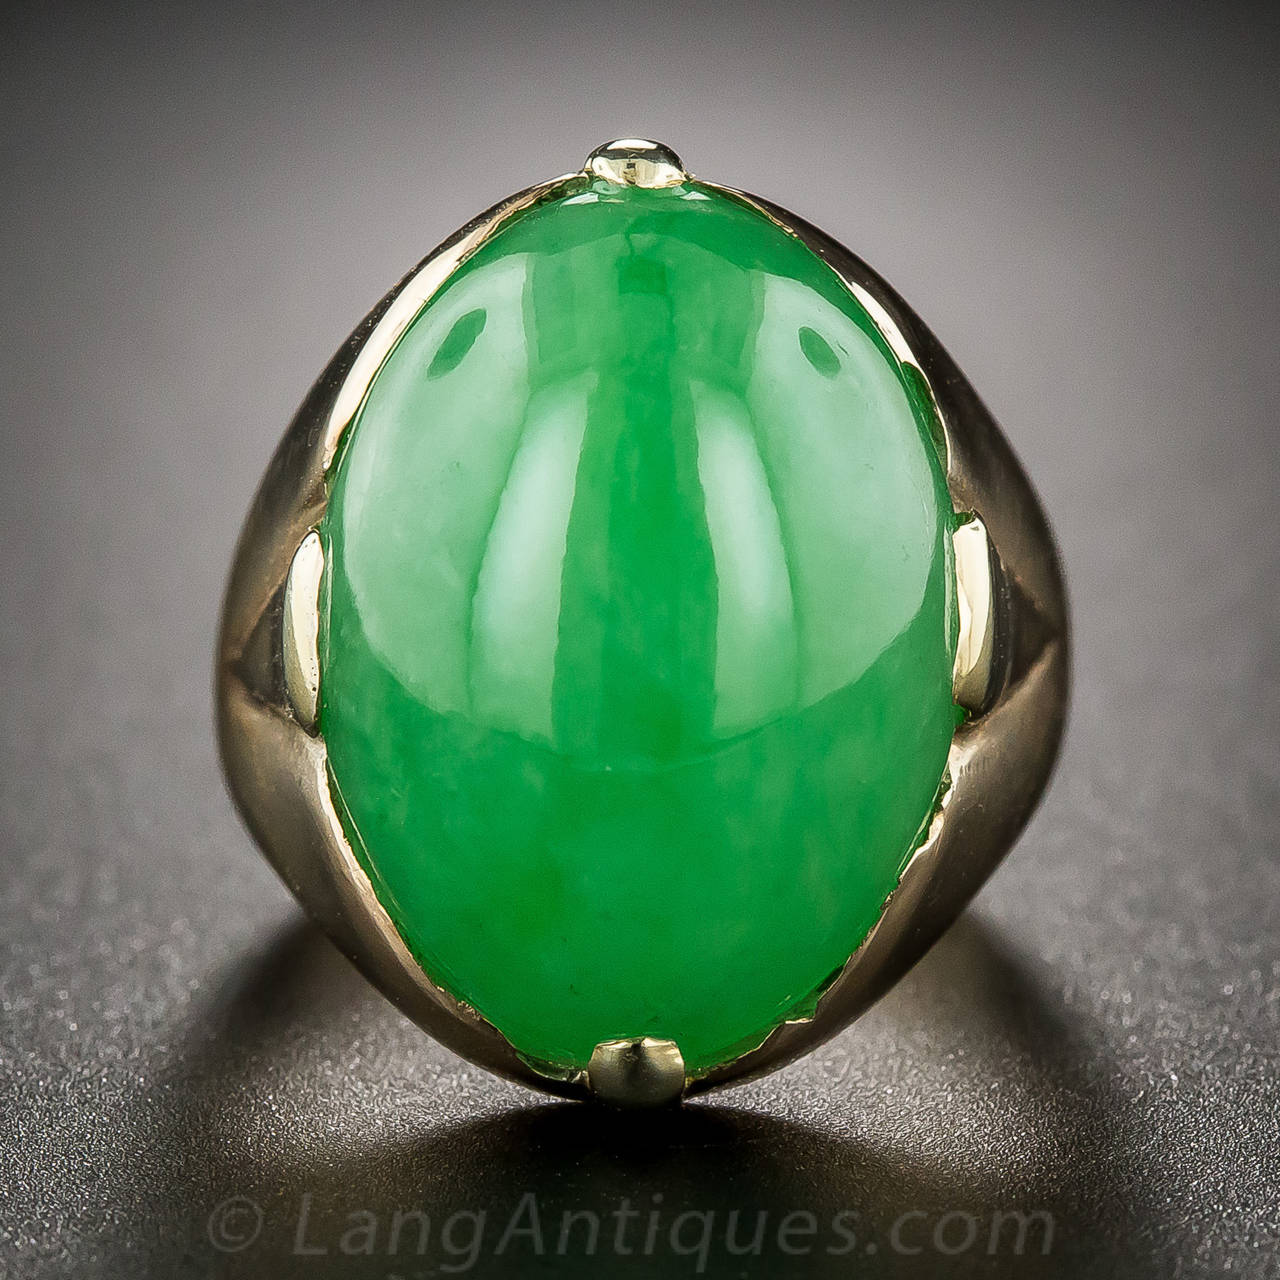 A big, bright and happy apple green, high-domed double-cabochon jade, authenticated as natural color by the Gemological Institute of America, and of substantial proportions - 18.34 x 13.41 x 7.69 millimeters - is simply presented in a rose gold